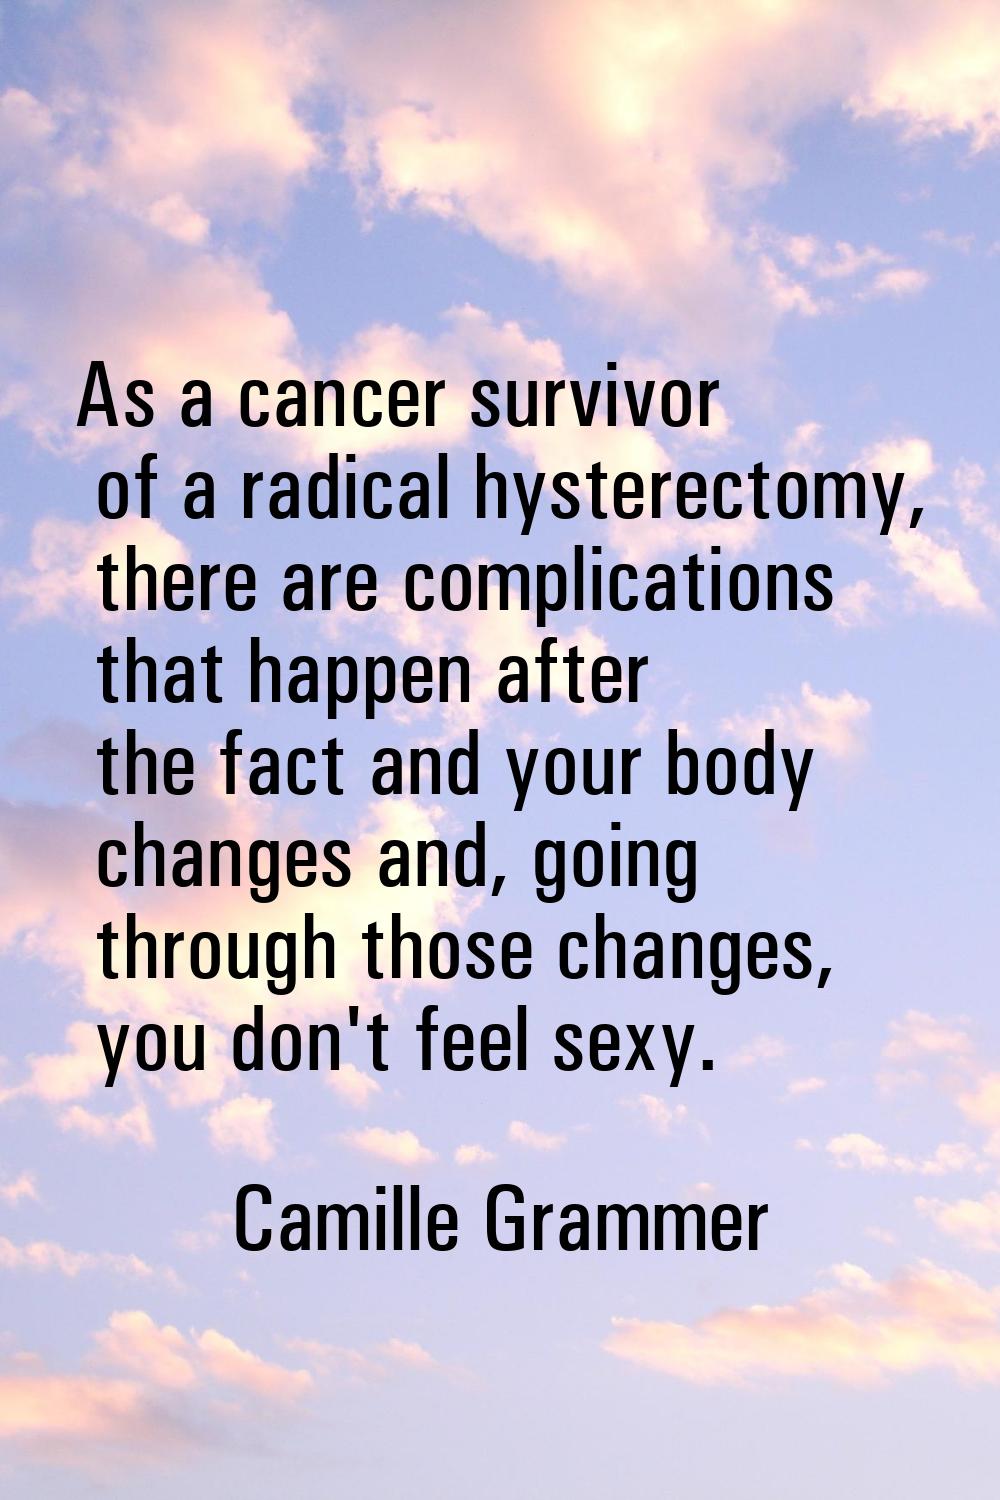 As a cancer survivor of a radical hysterectomy, there are complications that happen after the fact 